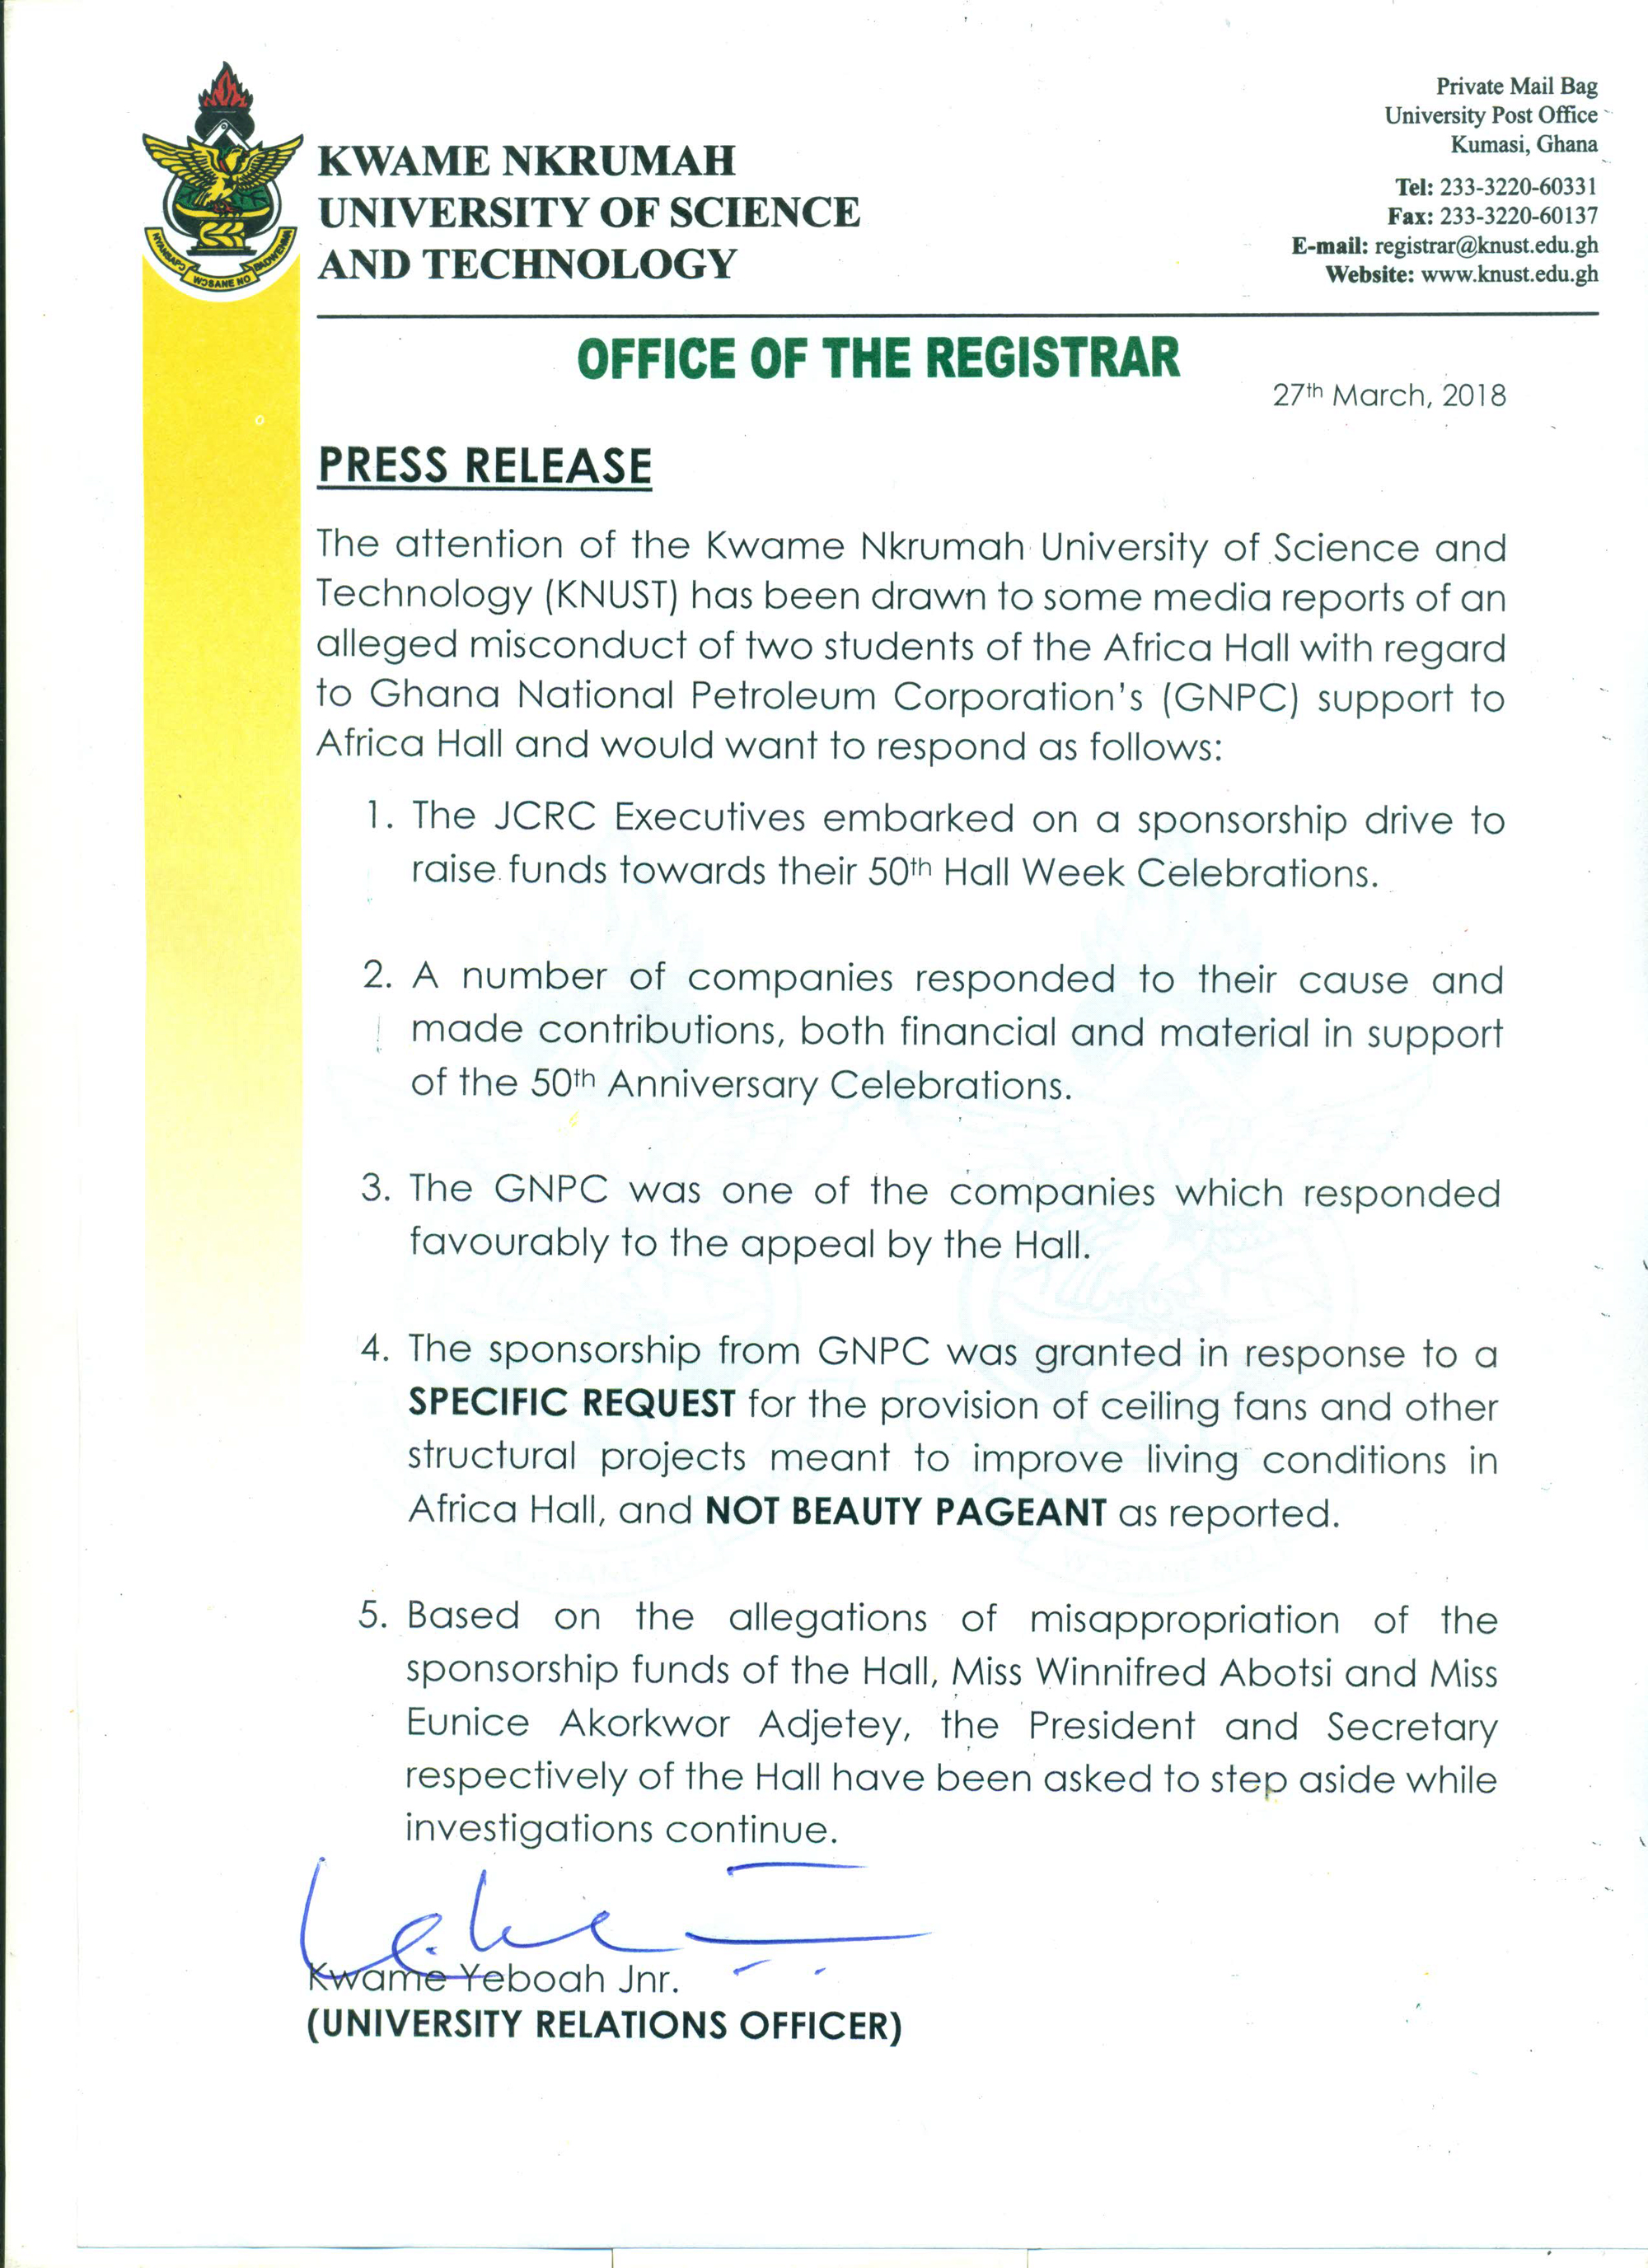 Press Release on the Allegations of Misappropriation of GNPC Sponsorship Funds